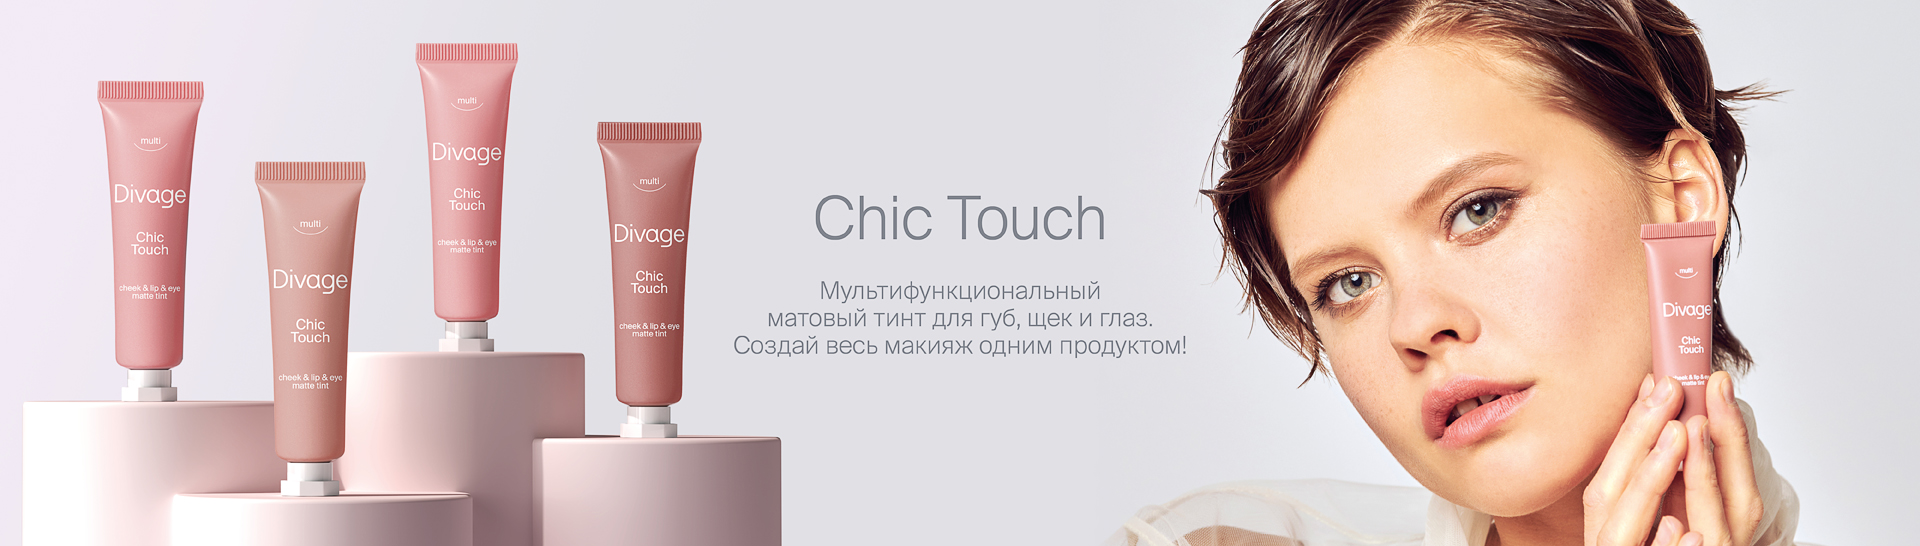 Chick touch banner